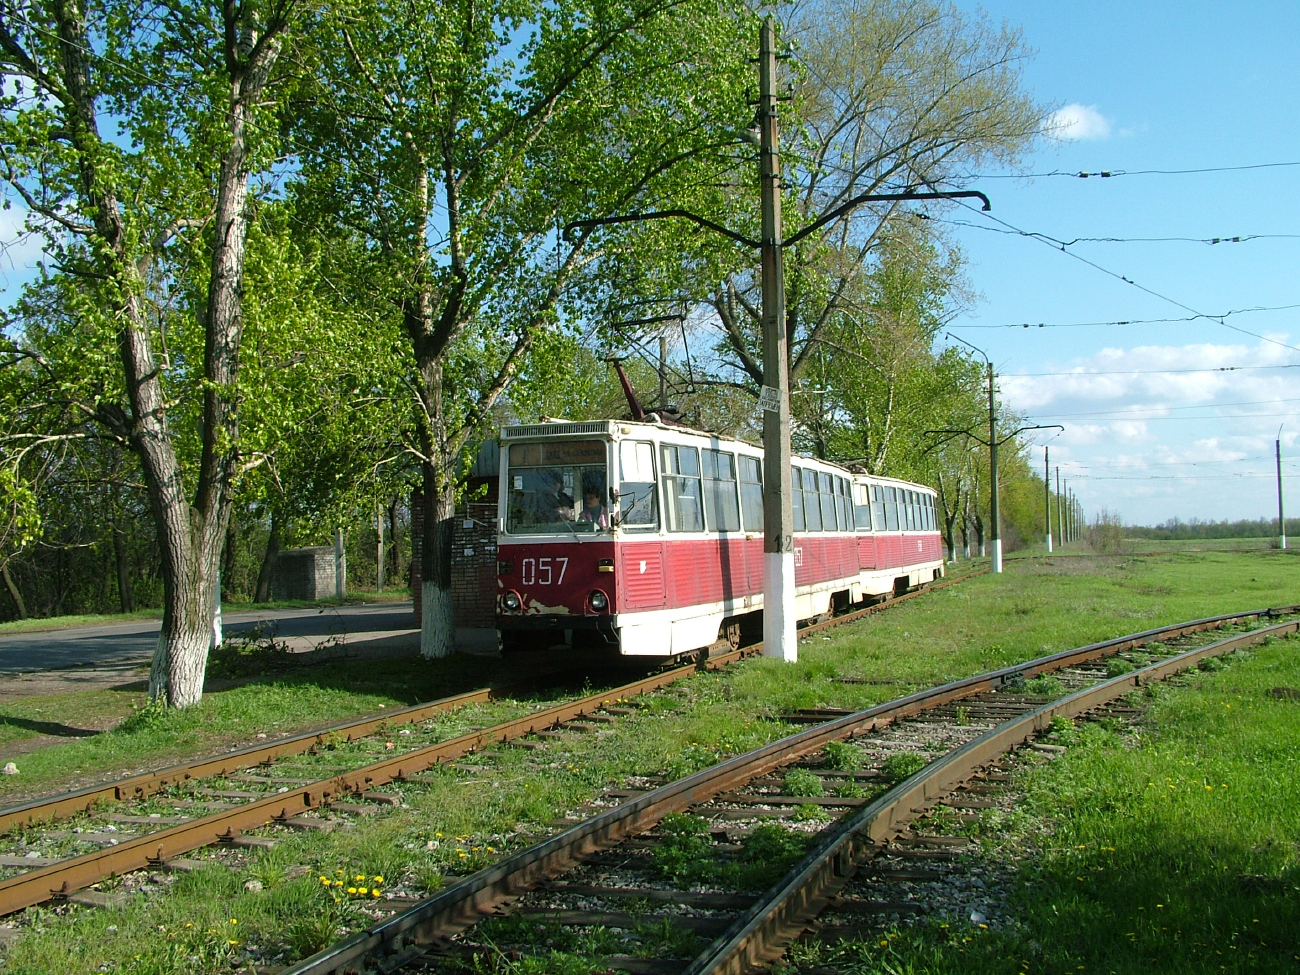 Awdijiwka, 71-605 (KTM-5M3) Nr. 057; Awdijiwka, 71-605 (KTM-5M3) Nr. 058; Awdijiwka — Lines and Infrastructure